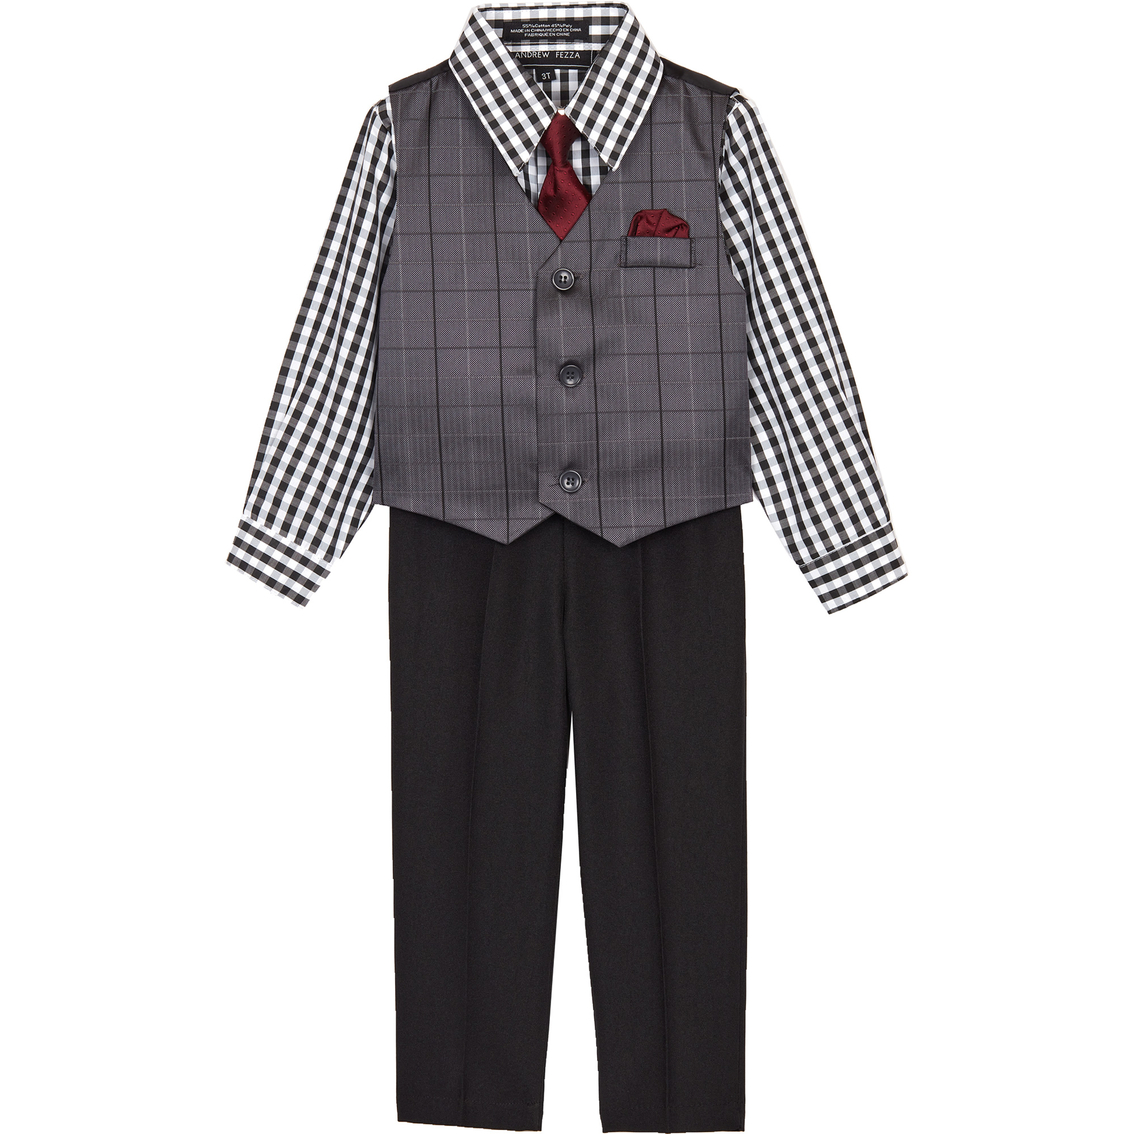 Andrew Fezza Infant Boys Charcoal 4 pc. Woven Set - Image 1 of 2